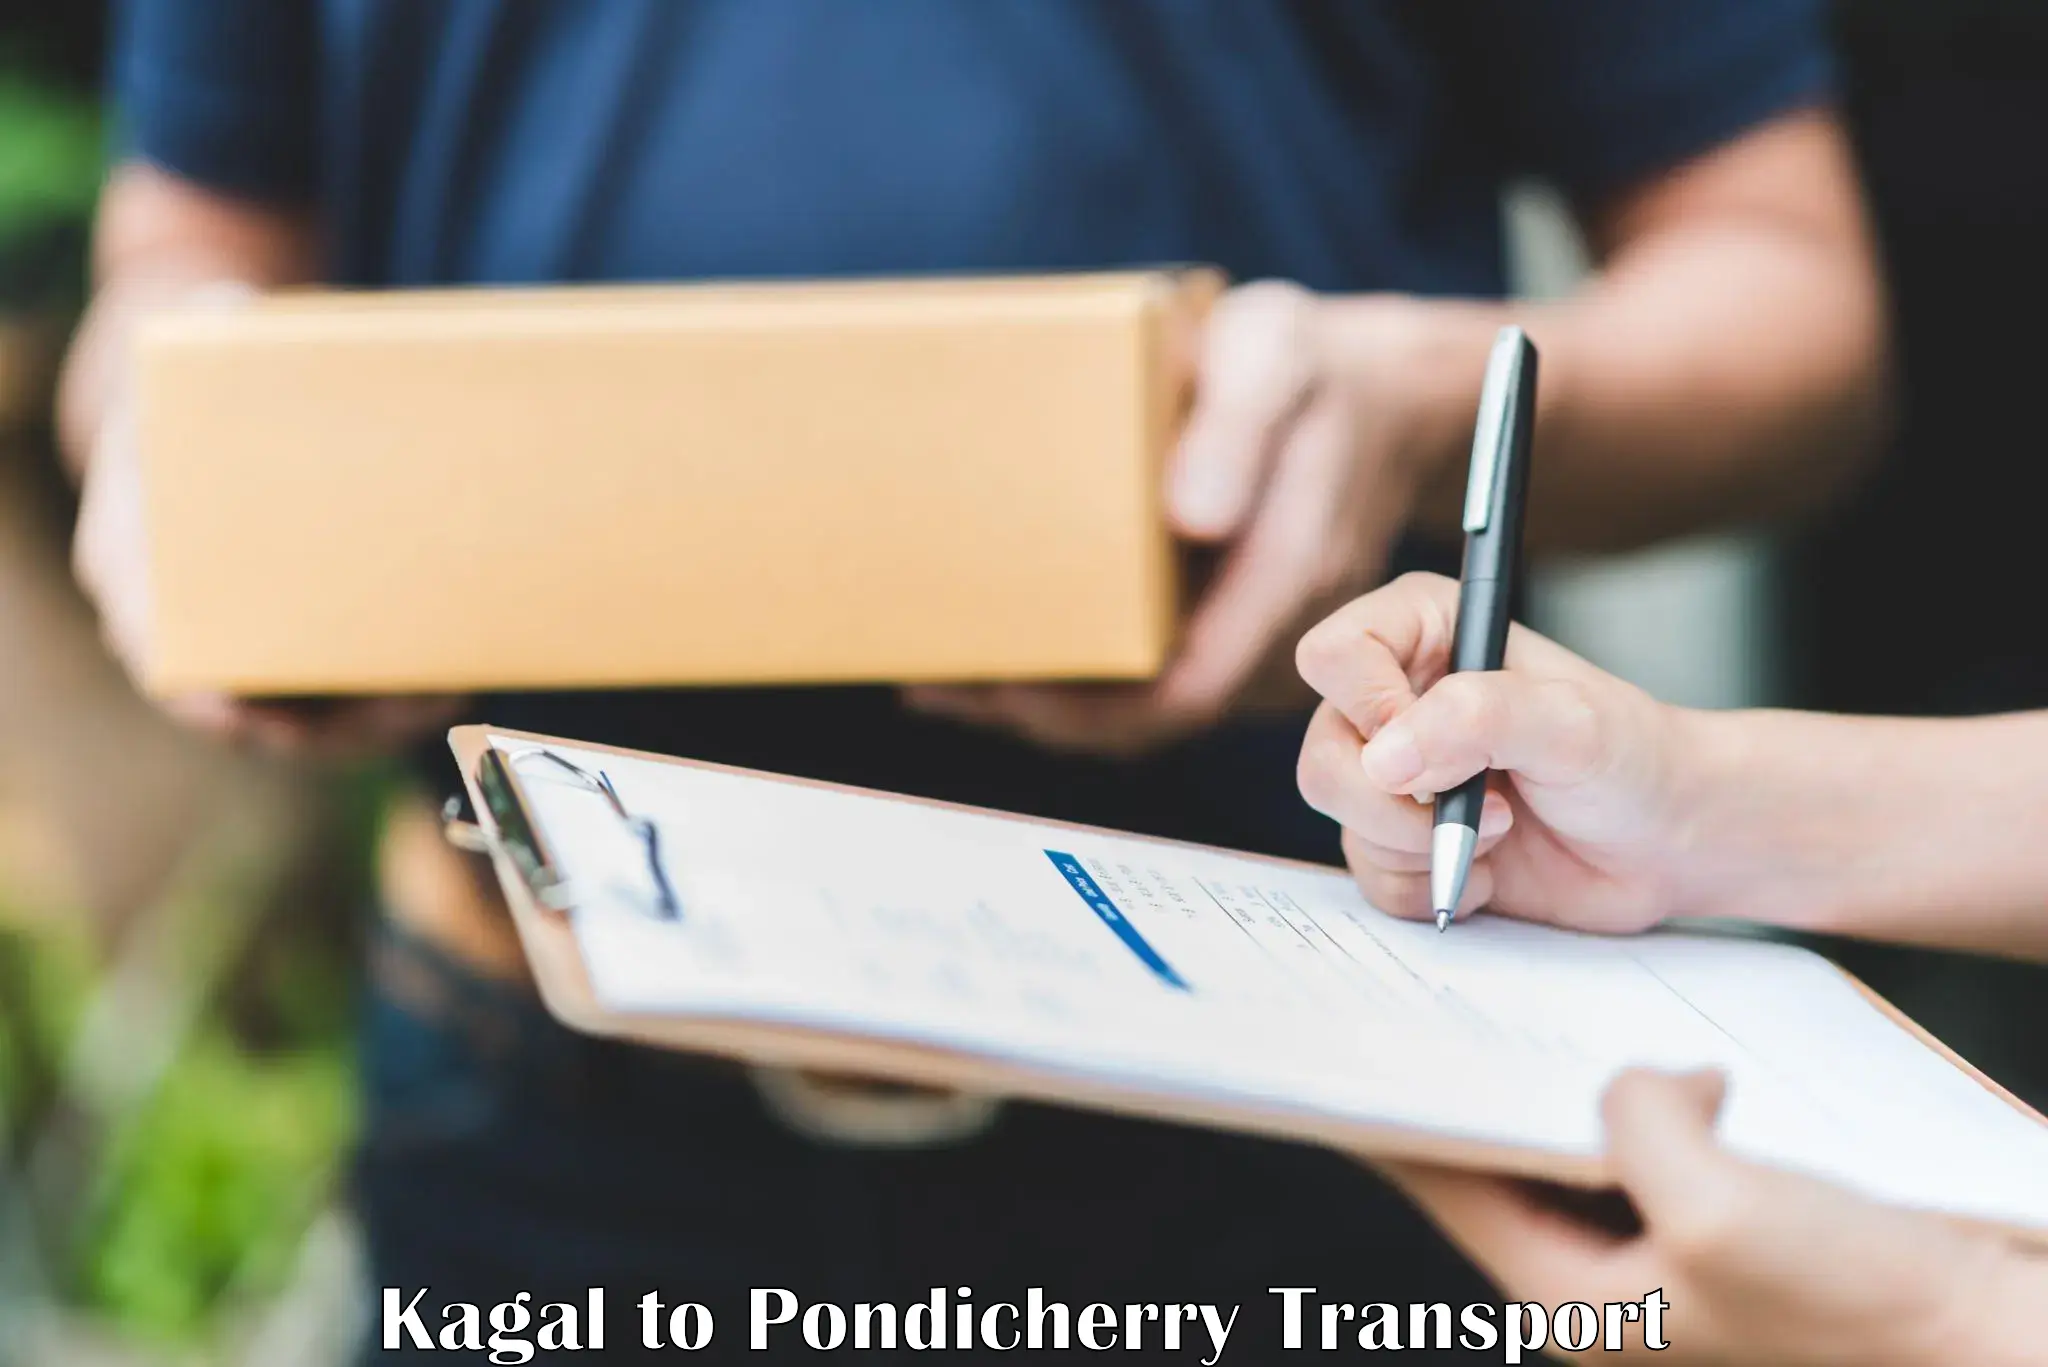 Container transport service Kagal to Pondicherry University